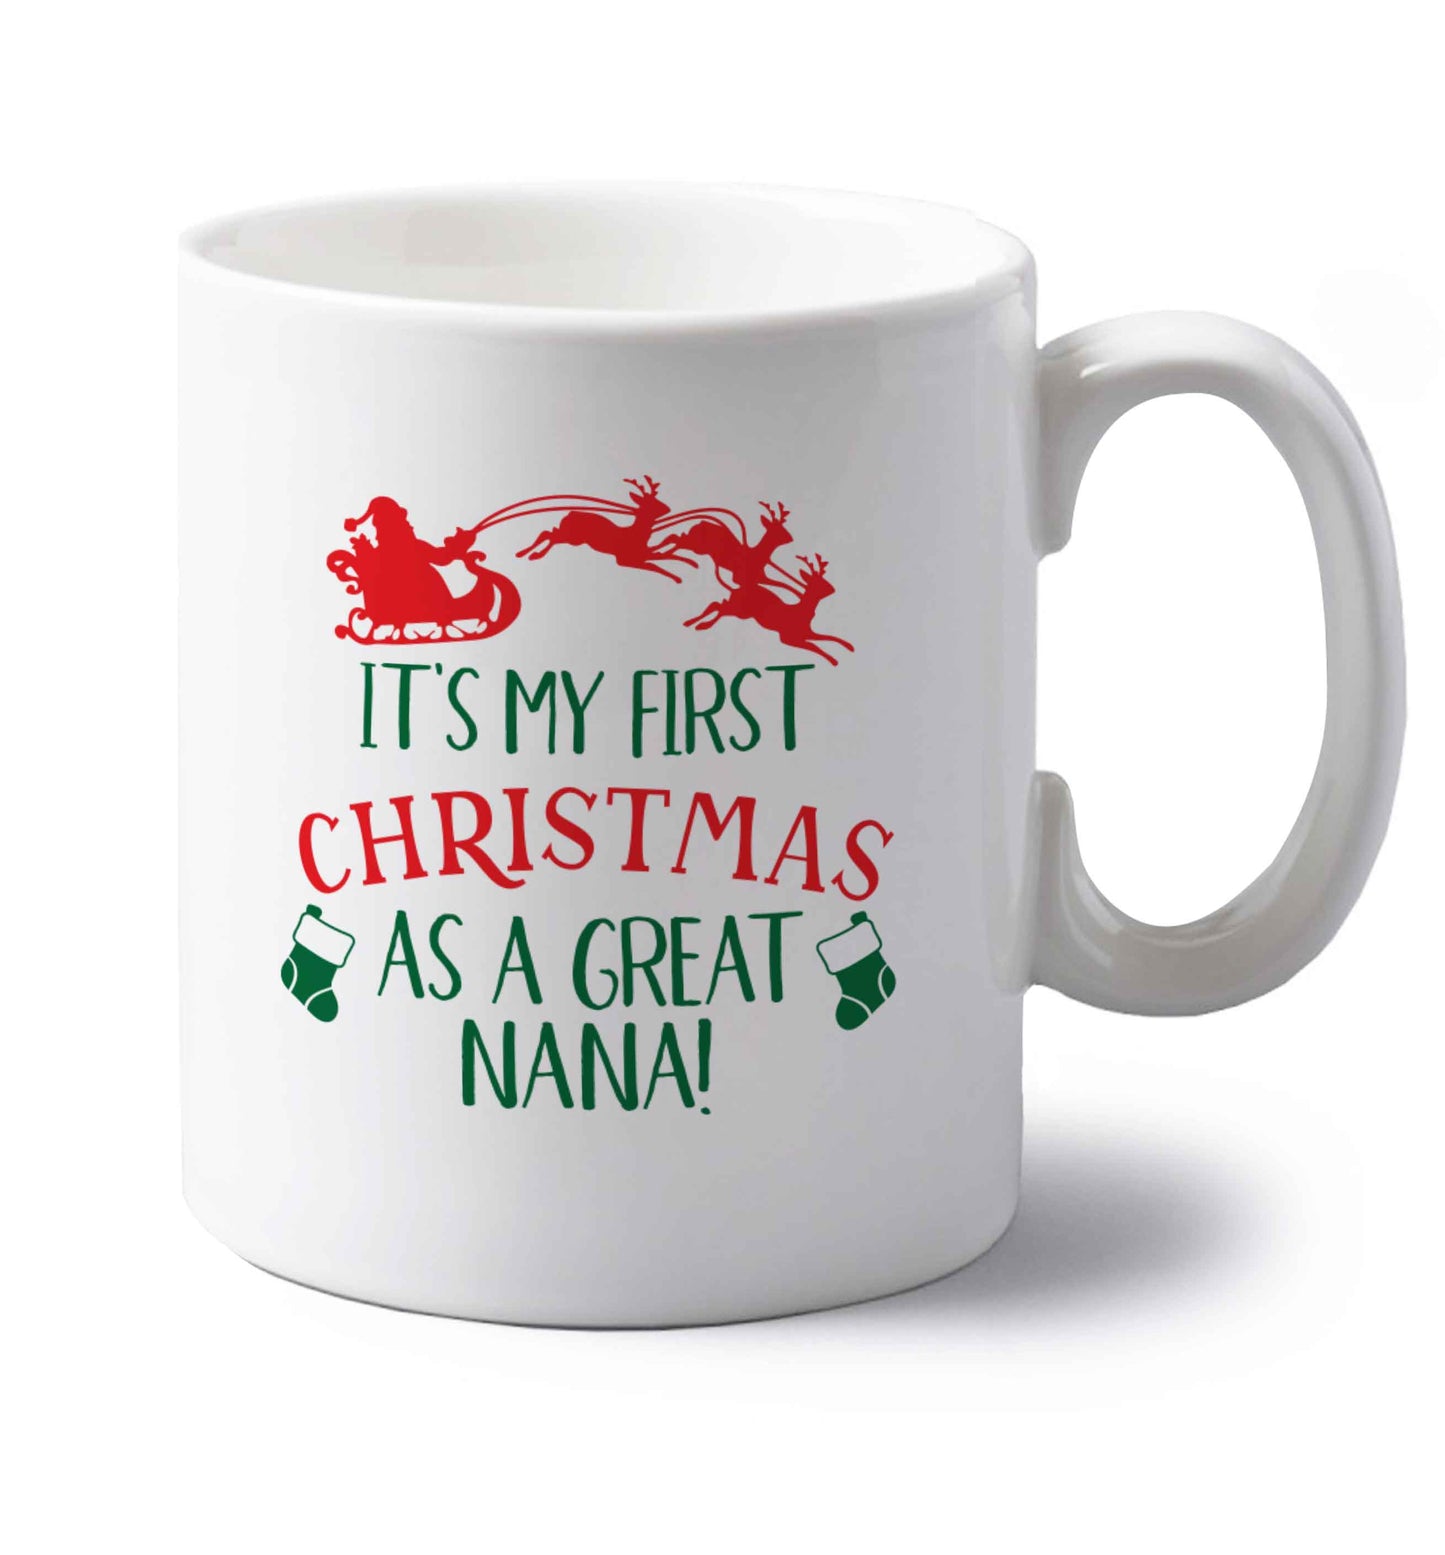 It's my first Christmas as a great nana! left handed white ceramic mug 